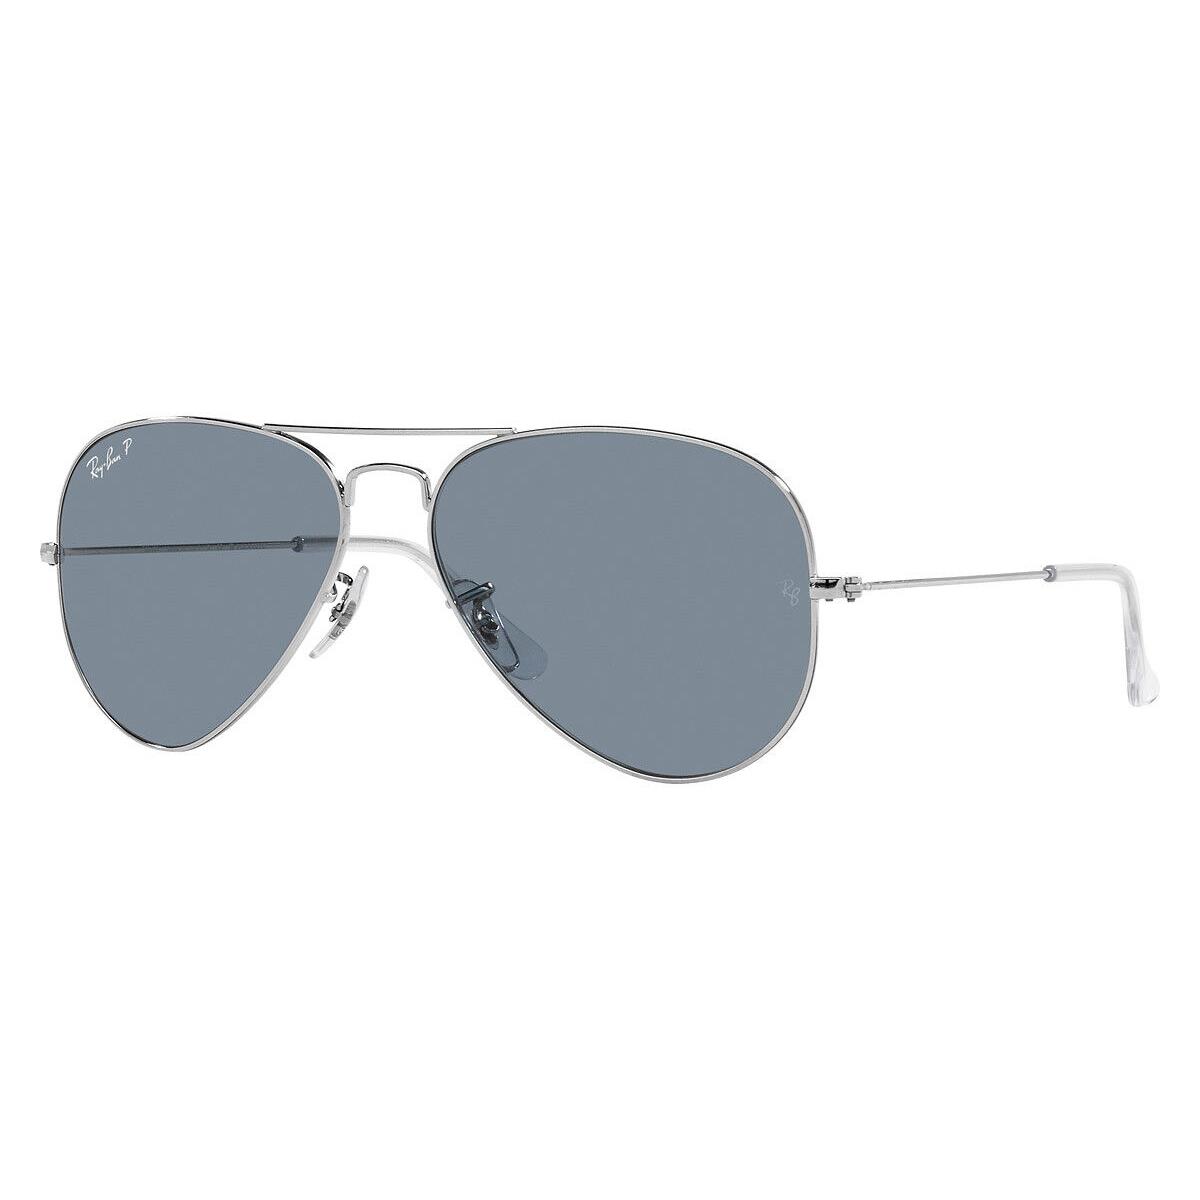 Ray-ban RB3025 Sunglasses Silver Blue Polarized 55mm - Frame: Silver / Blue Polarized, Lens: Blue Polarized